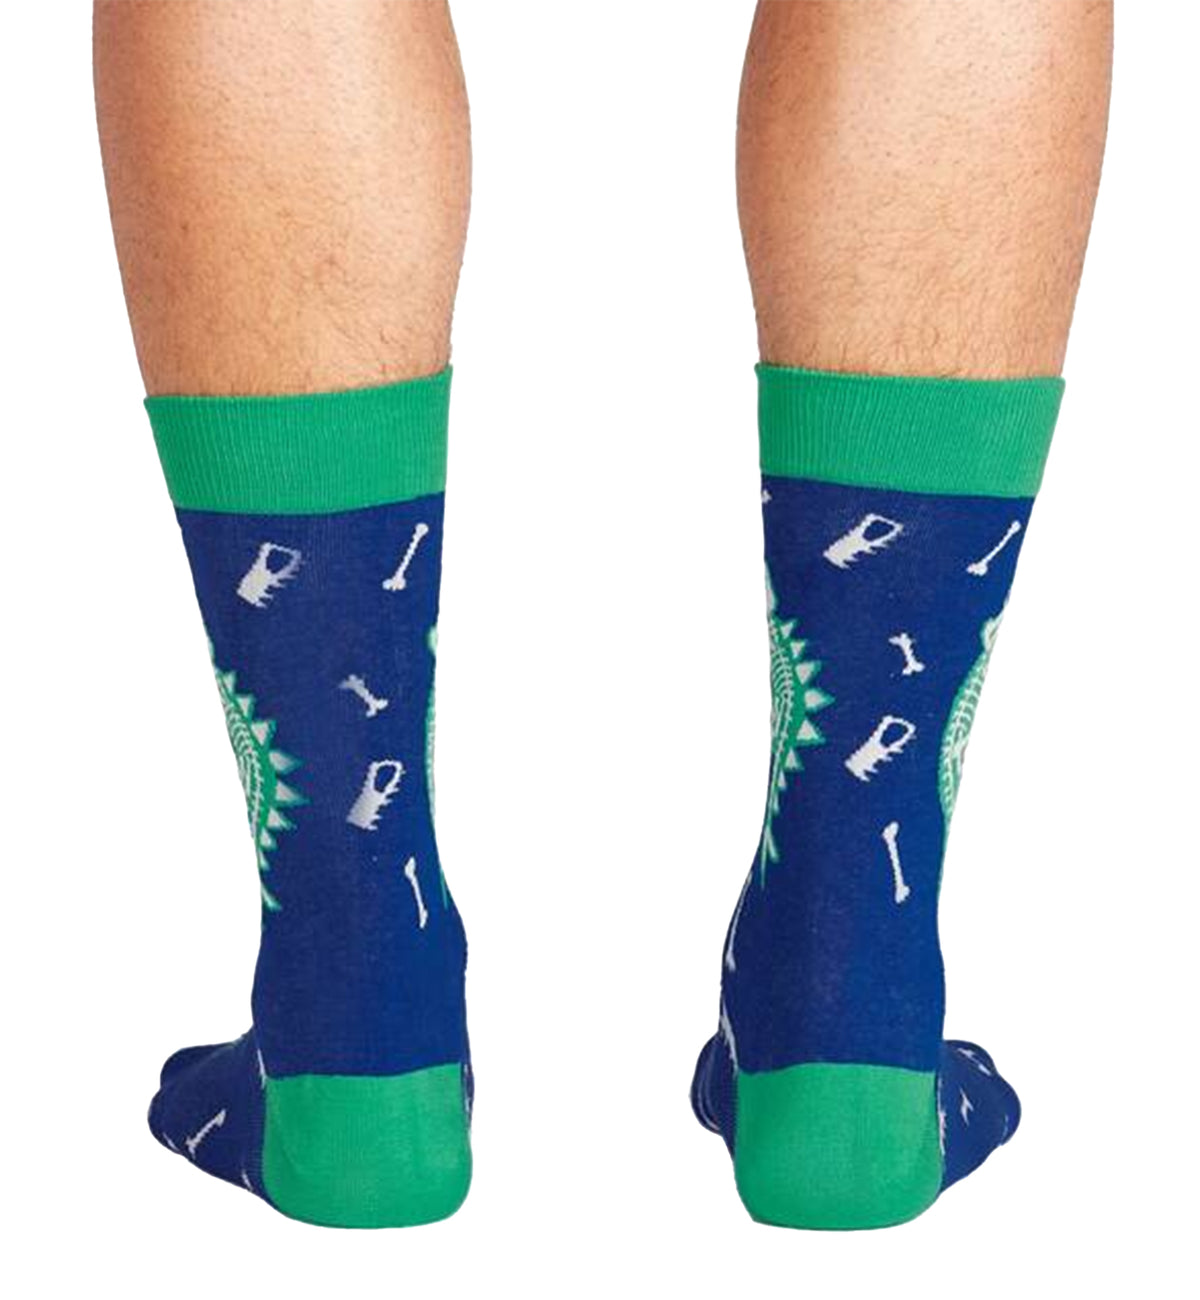 SOCK it to me Men&#39;s Crew Socks (mef0335),Arch-eology - Arch-eology,One Size